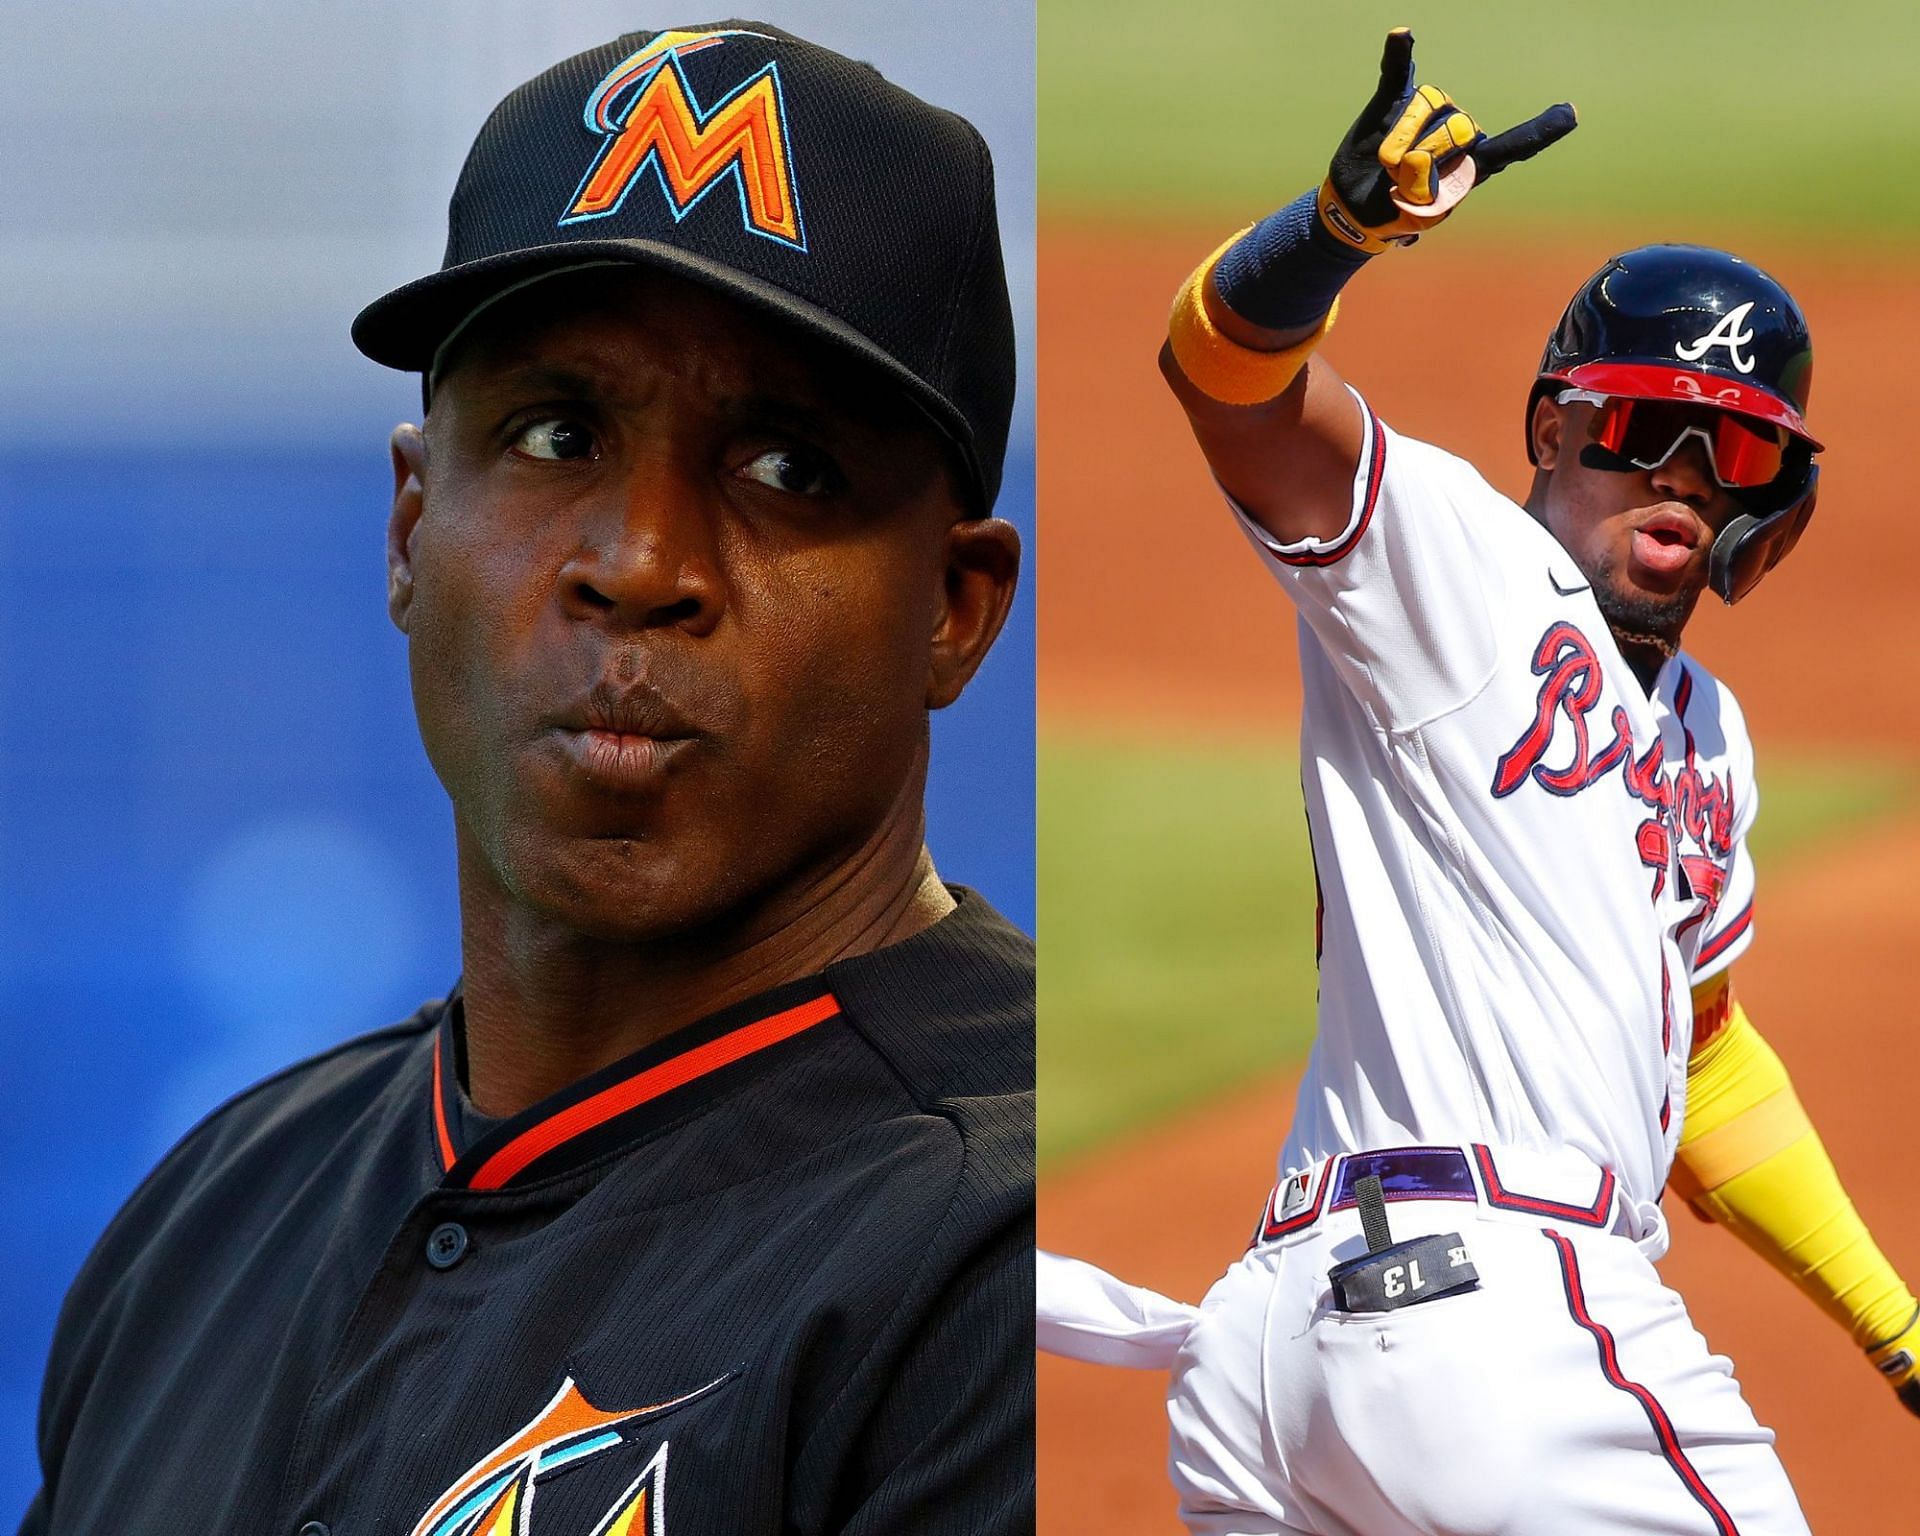 Ronald Acuna Jr. is set to surpass a very particular record held by Barry Bonds and Eric Davis